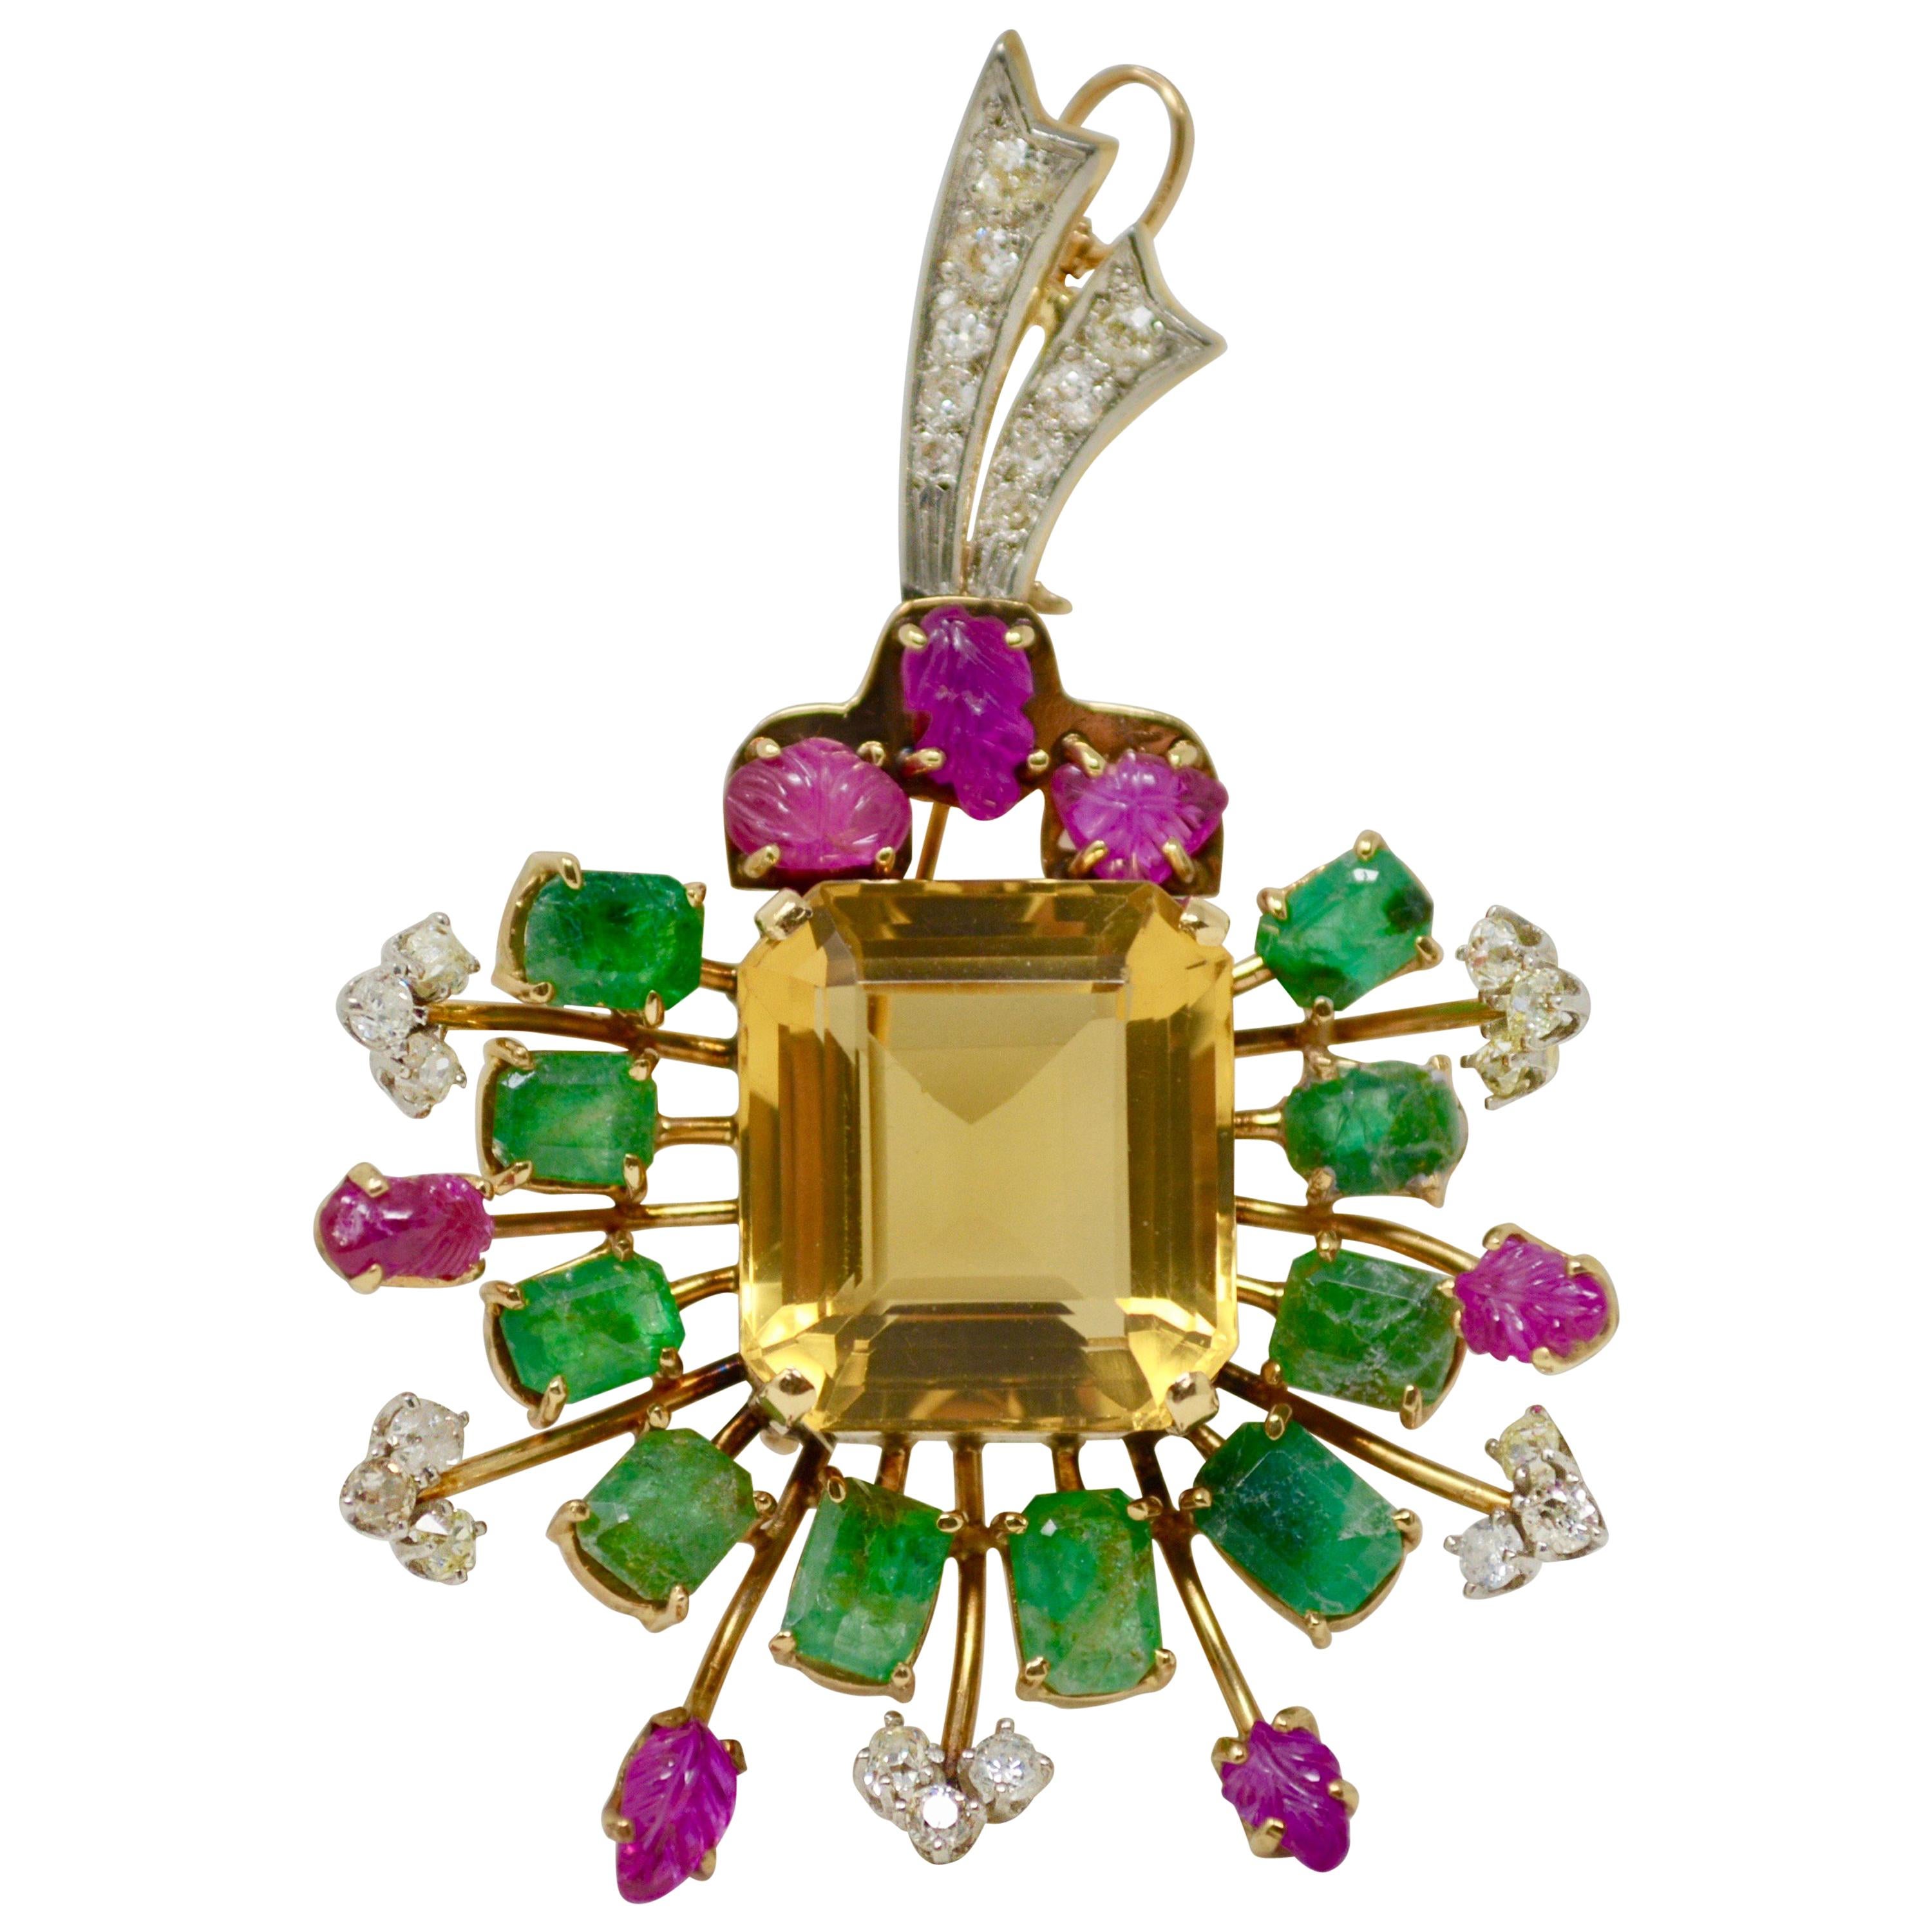 Natural Ruby, Emerald, Citrine and Diamond Broach or Pendant in 14 Karat Gold.